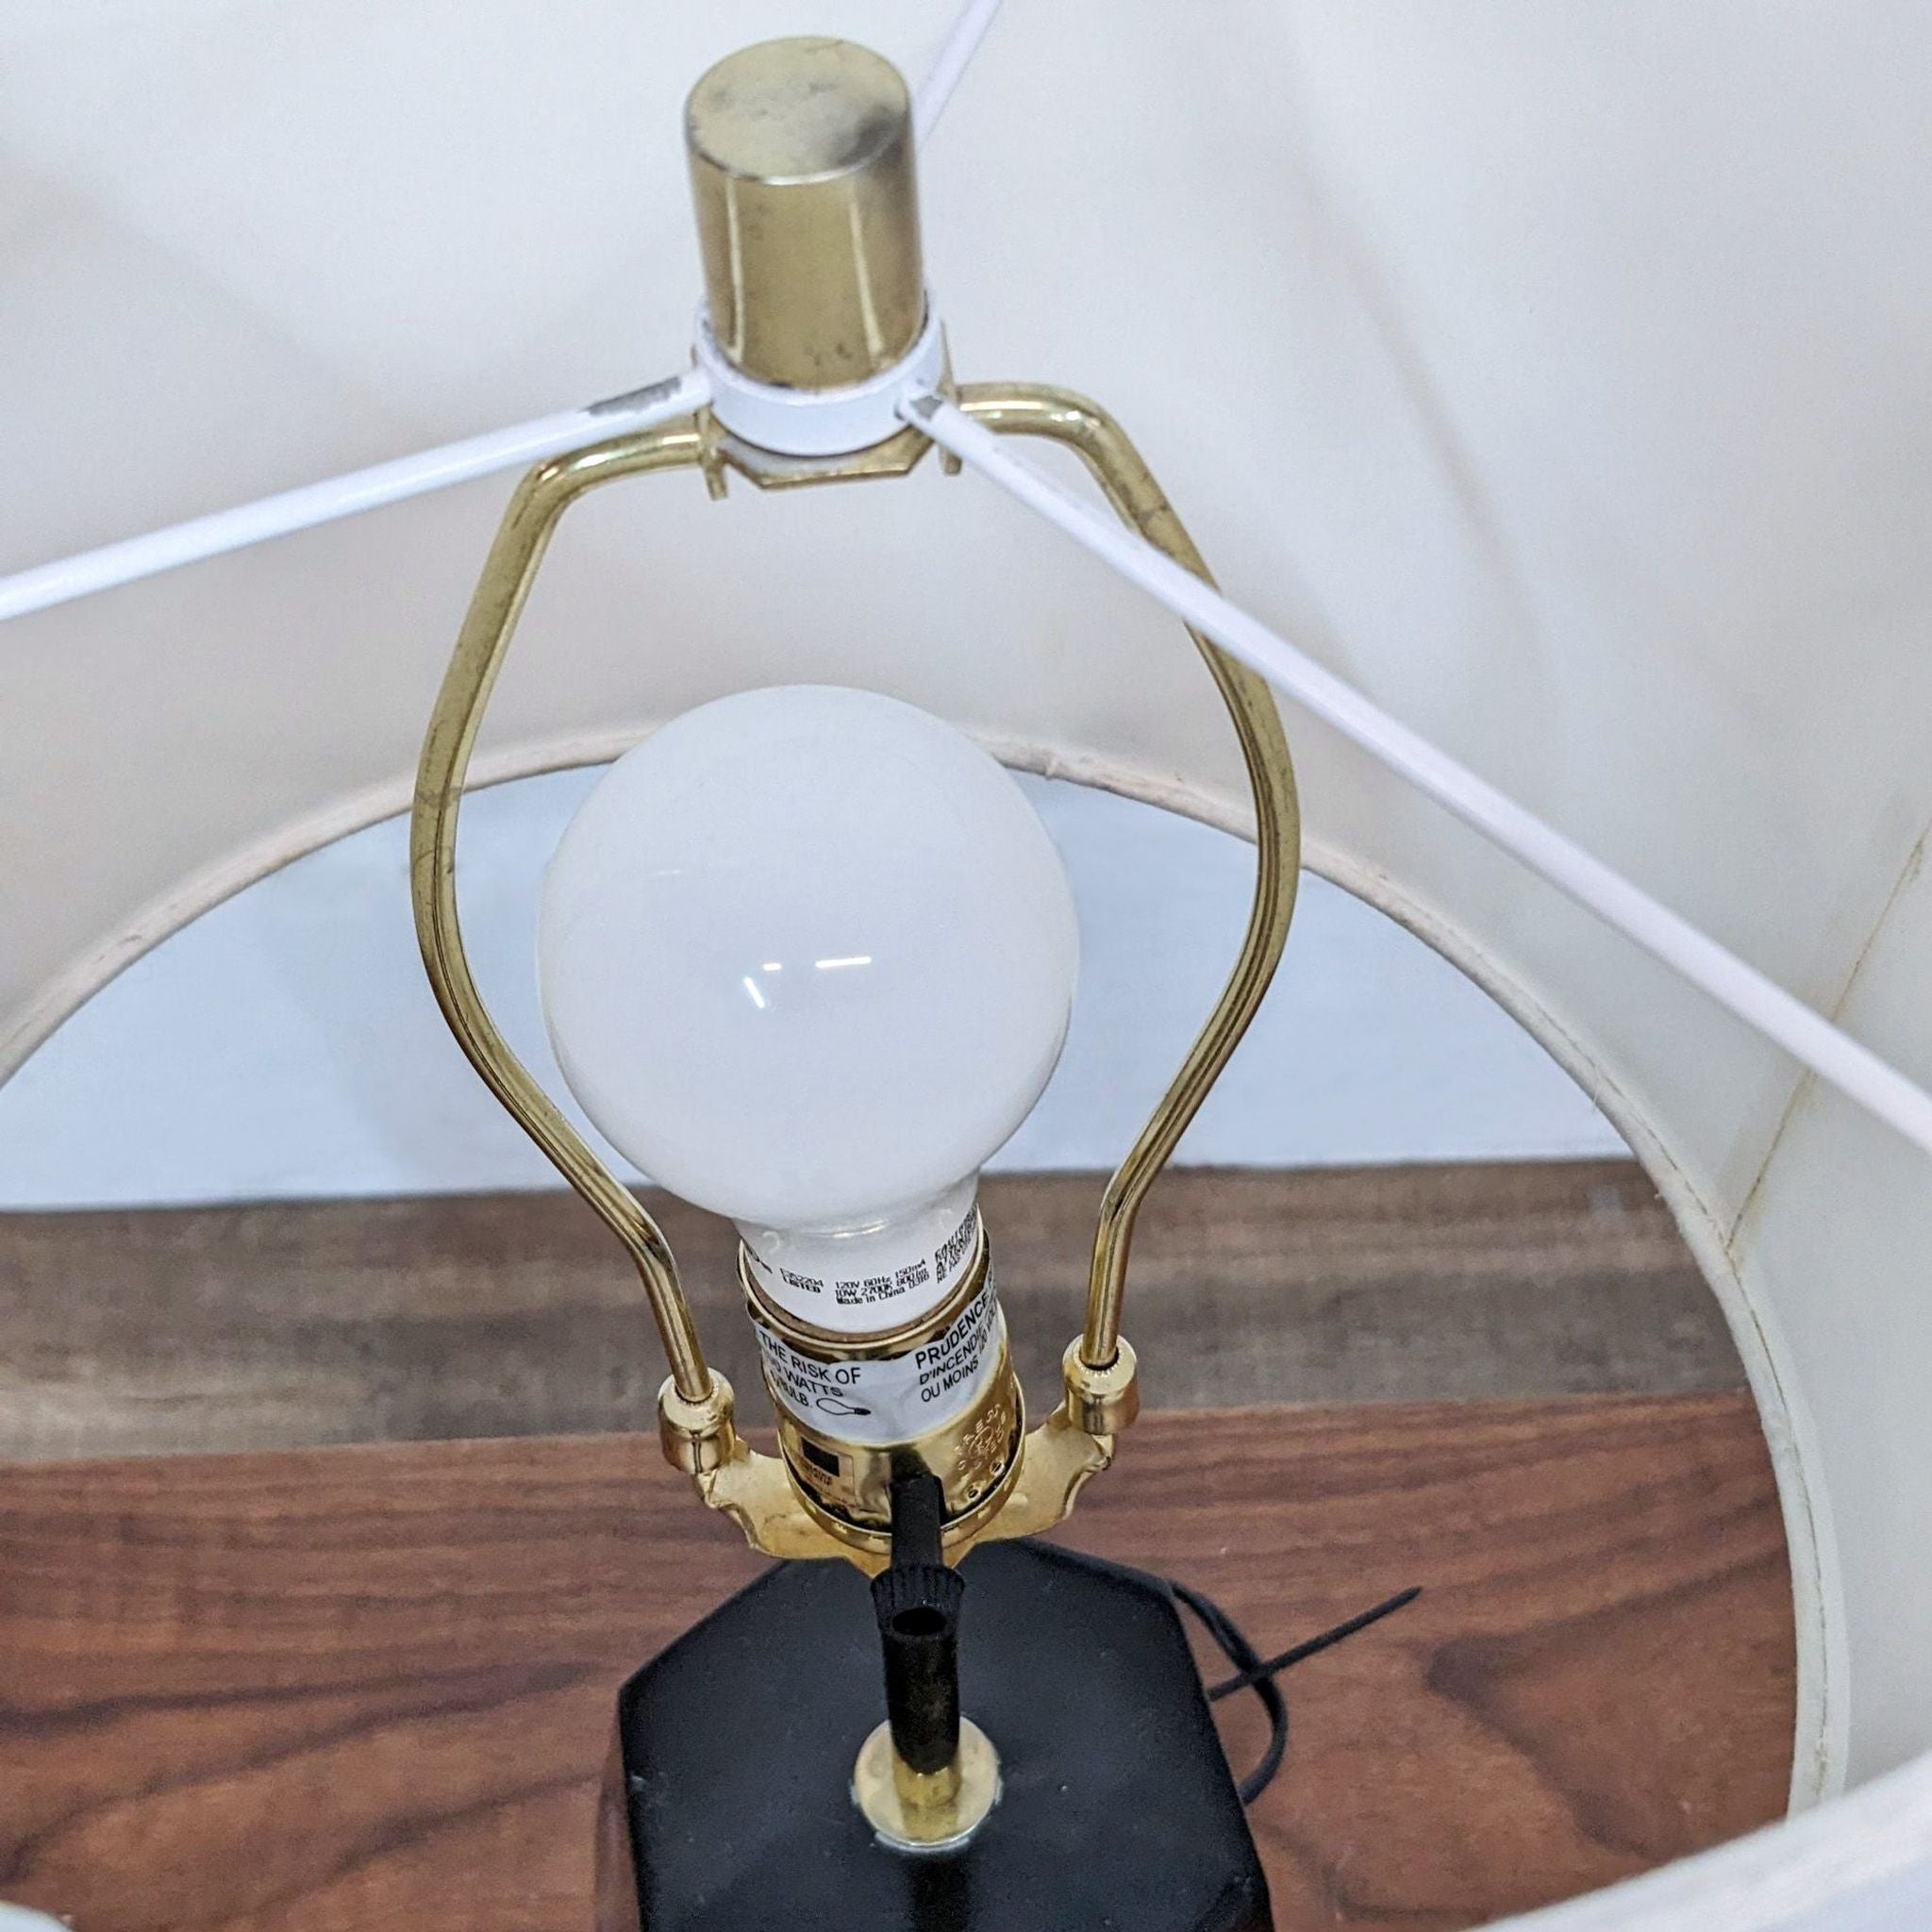 Interior view of Reperch table lamp showing white bulb and gold-tone metal details under shade.